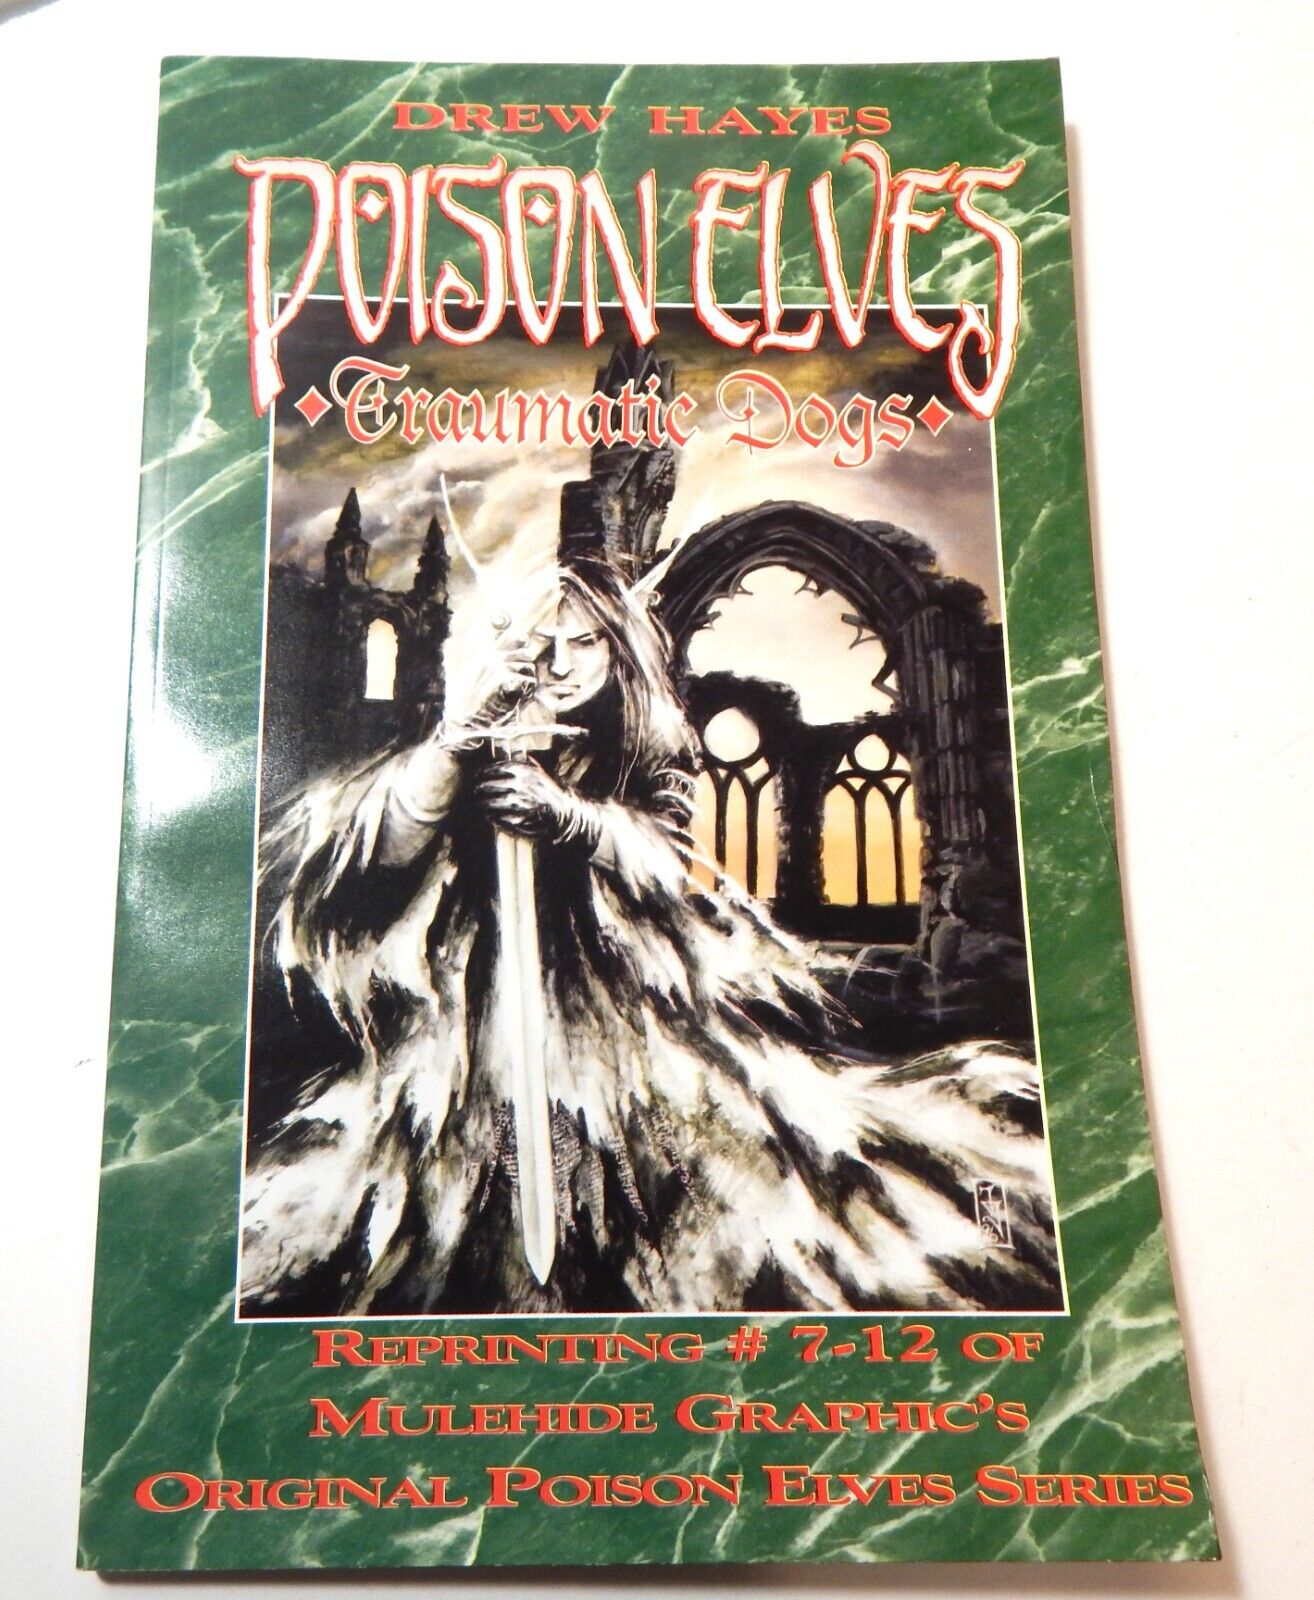 Poison Elves Vol. 2: Traumatic Dogs by Drew Hayes 1996 TPB 2nd Print